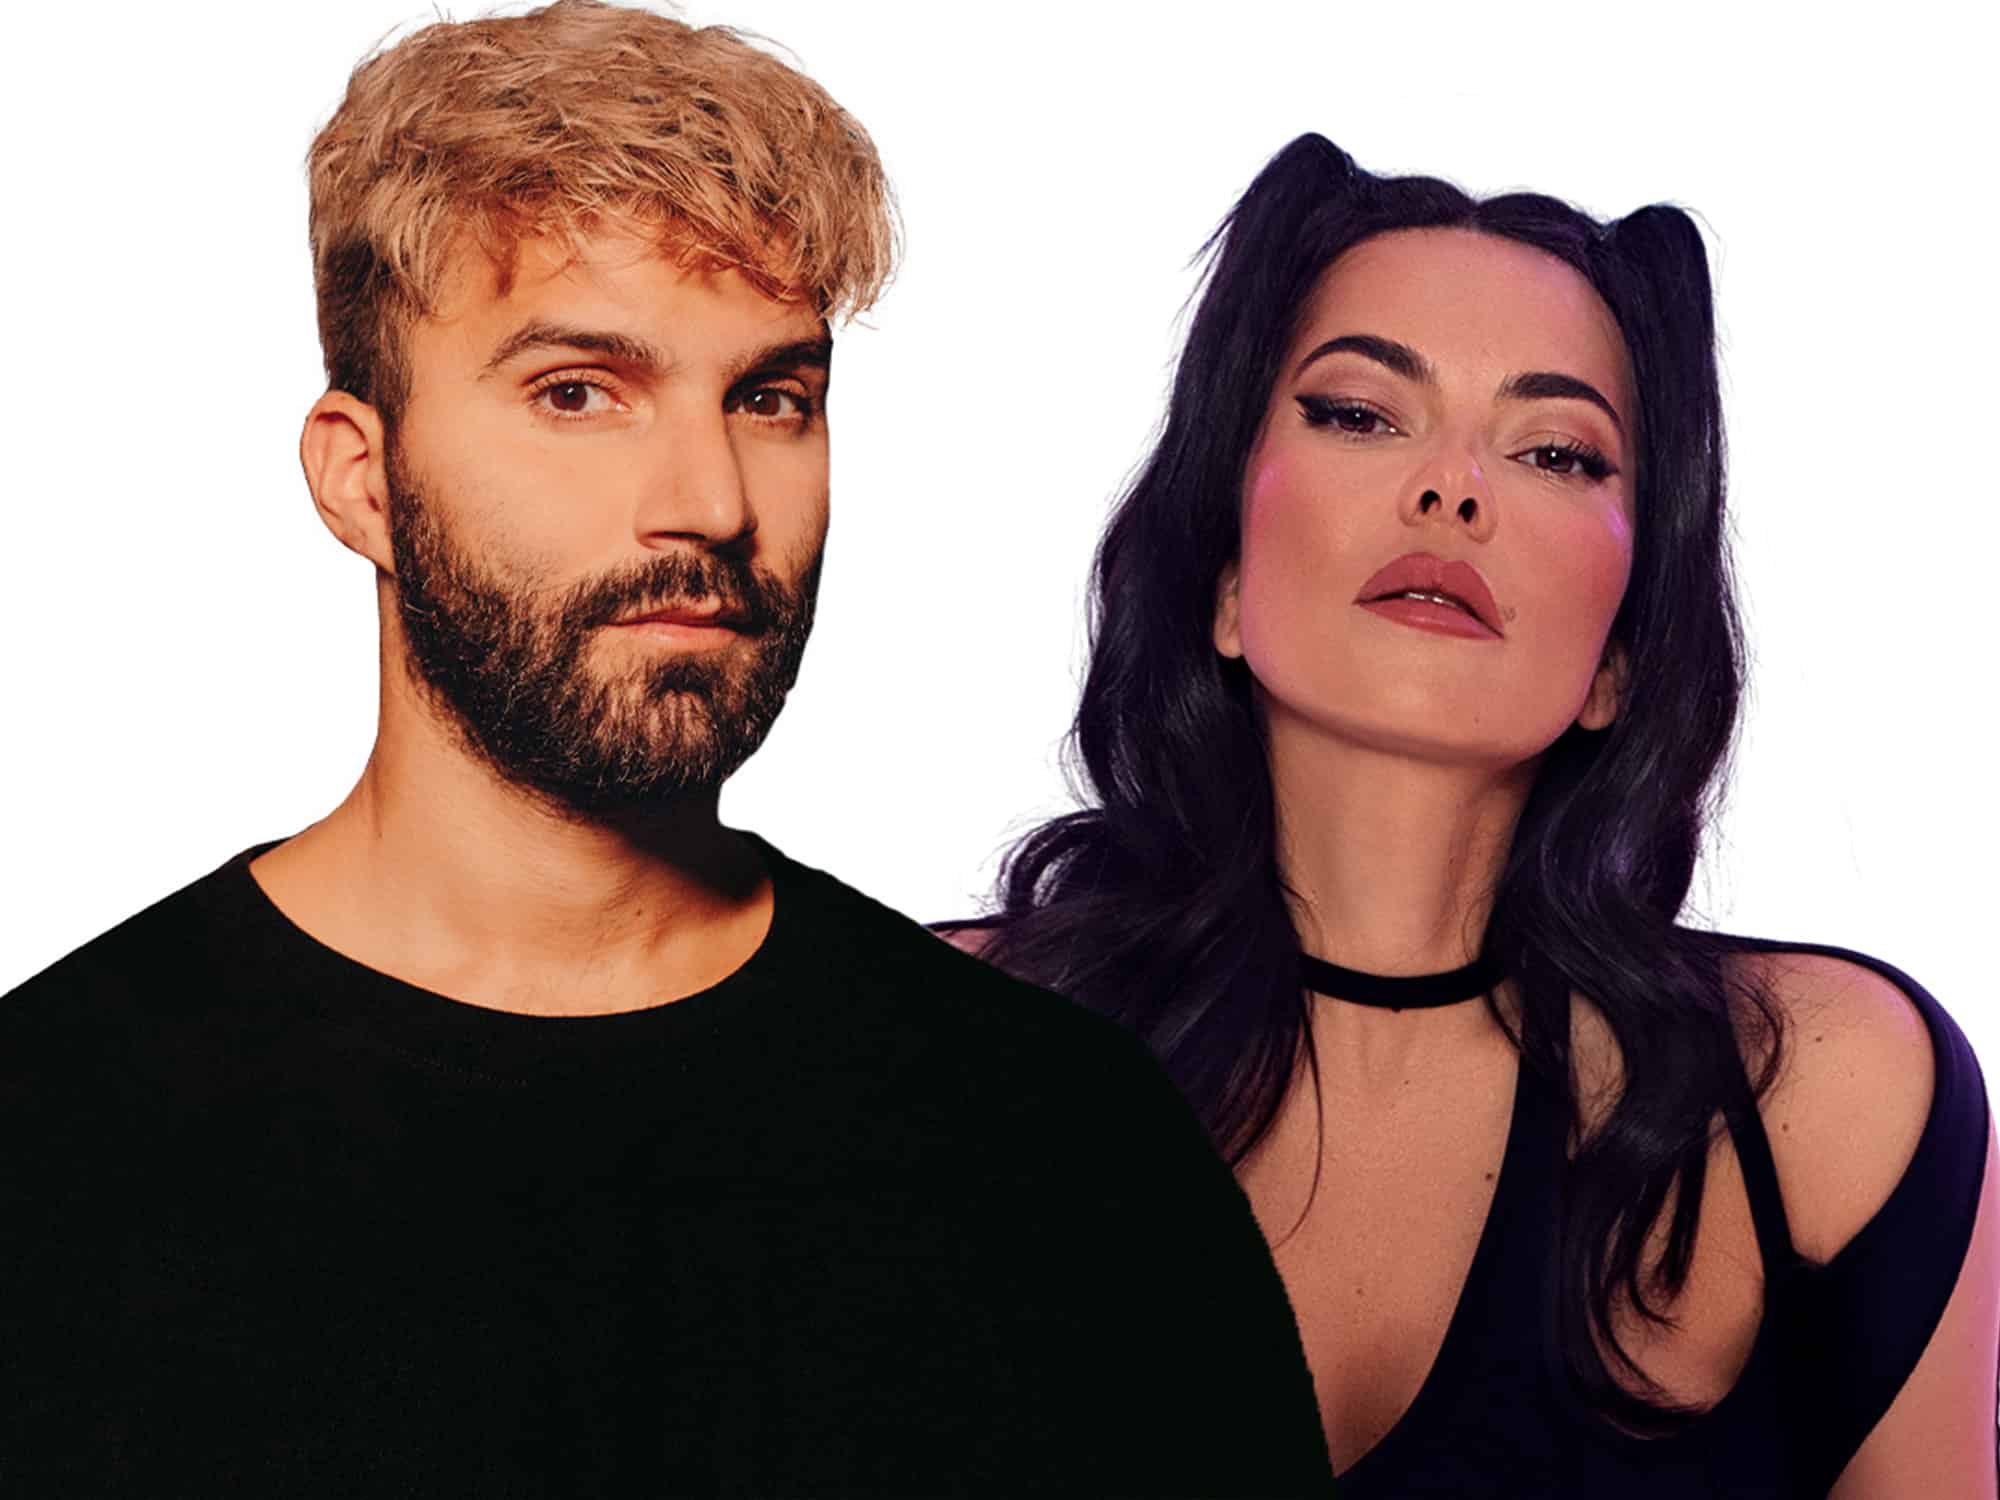 R3HAB teams up with INNA for smash track ‘Rock My Body’, Global dance music industry reaches $11.3 billion 16% higher than pre-pandemic, Jayden Goldthorpe reveals tech-house banger ‘On The Floor’ - WTEMN [2023-05 (Week #18)]